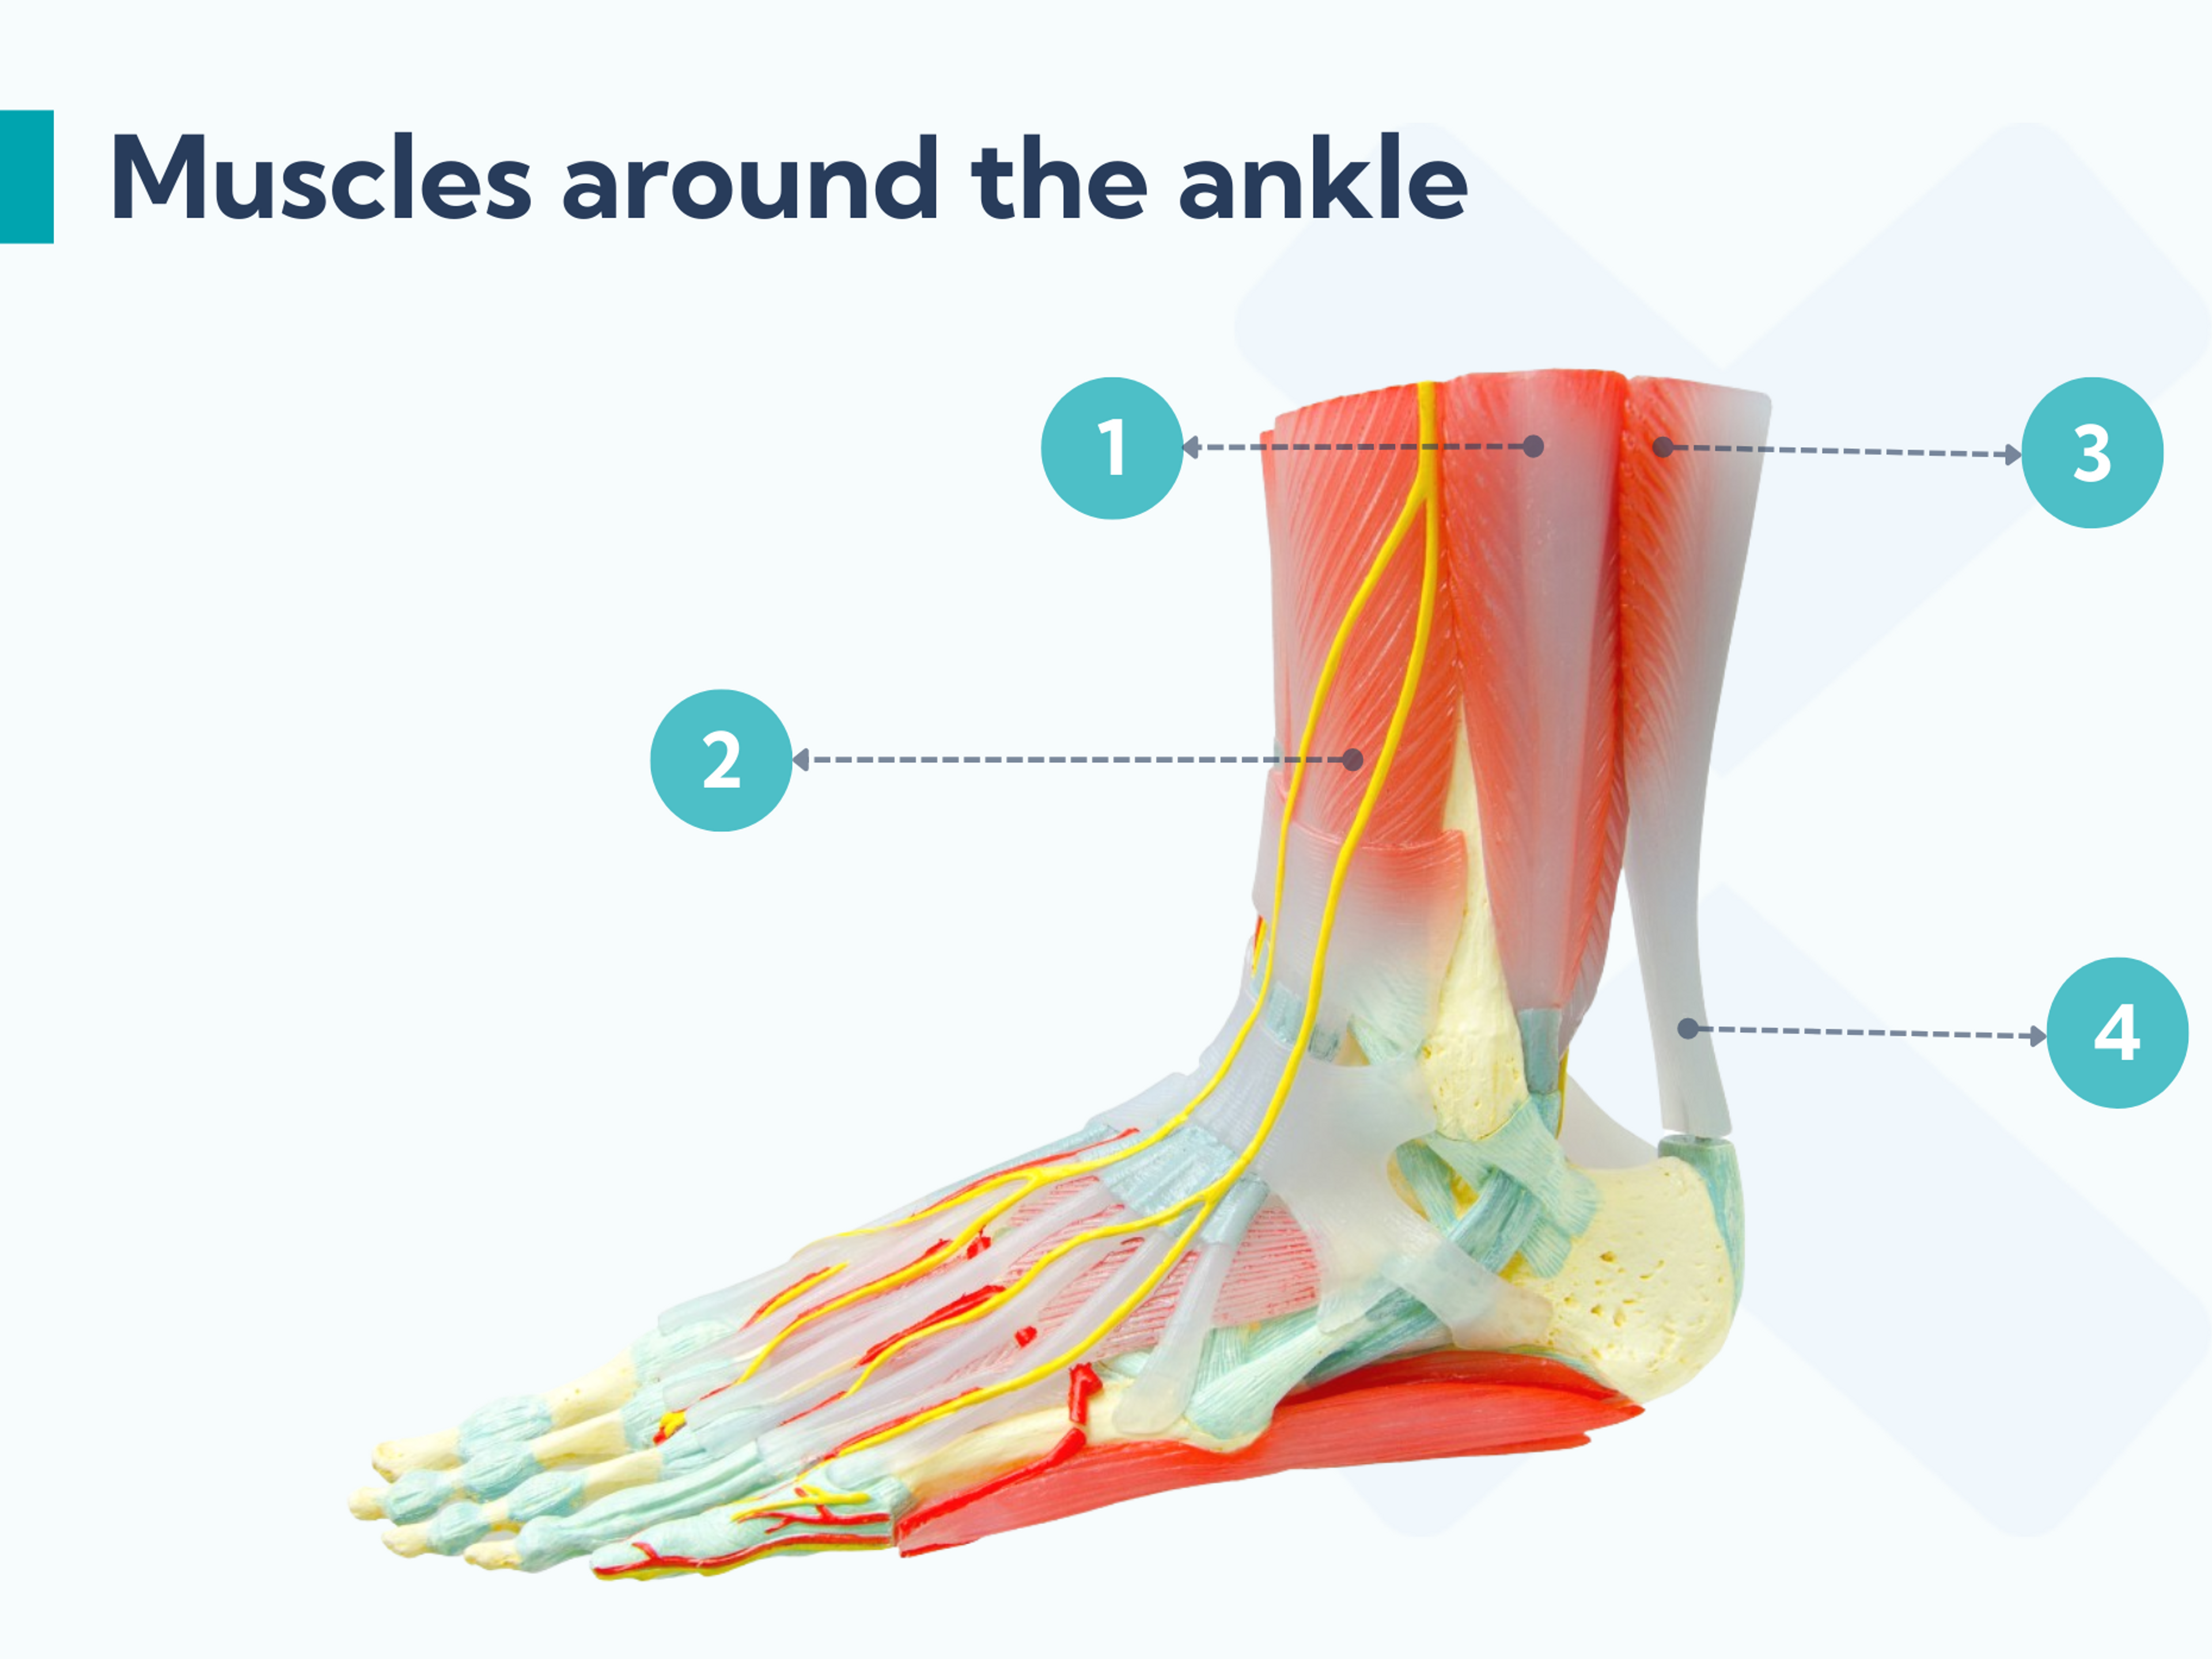 These are the muscles around the ankle that you should target with strengthening exercises when you've sprained your ankle.